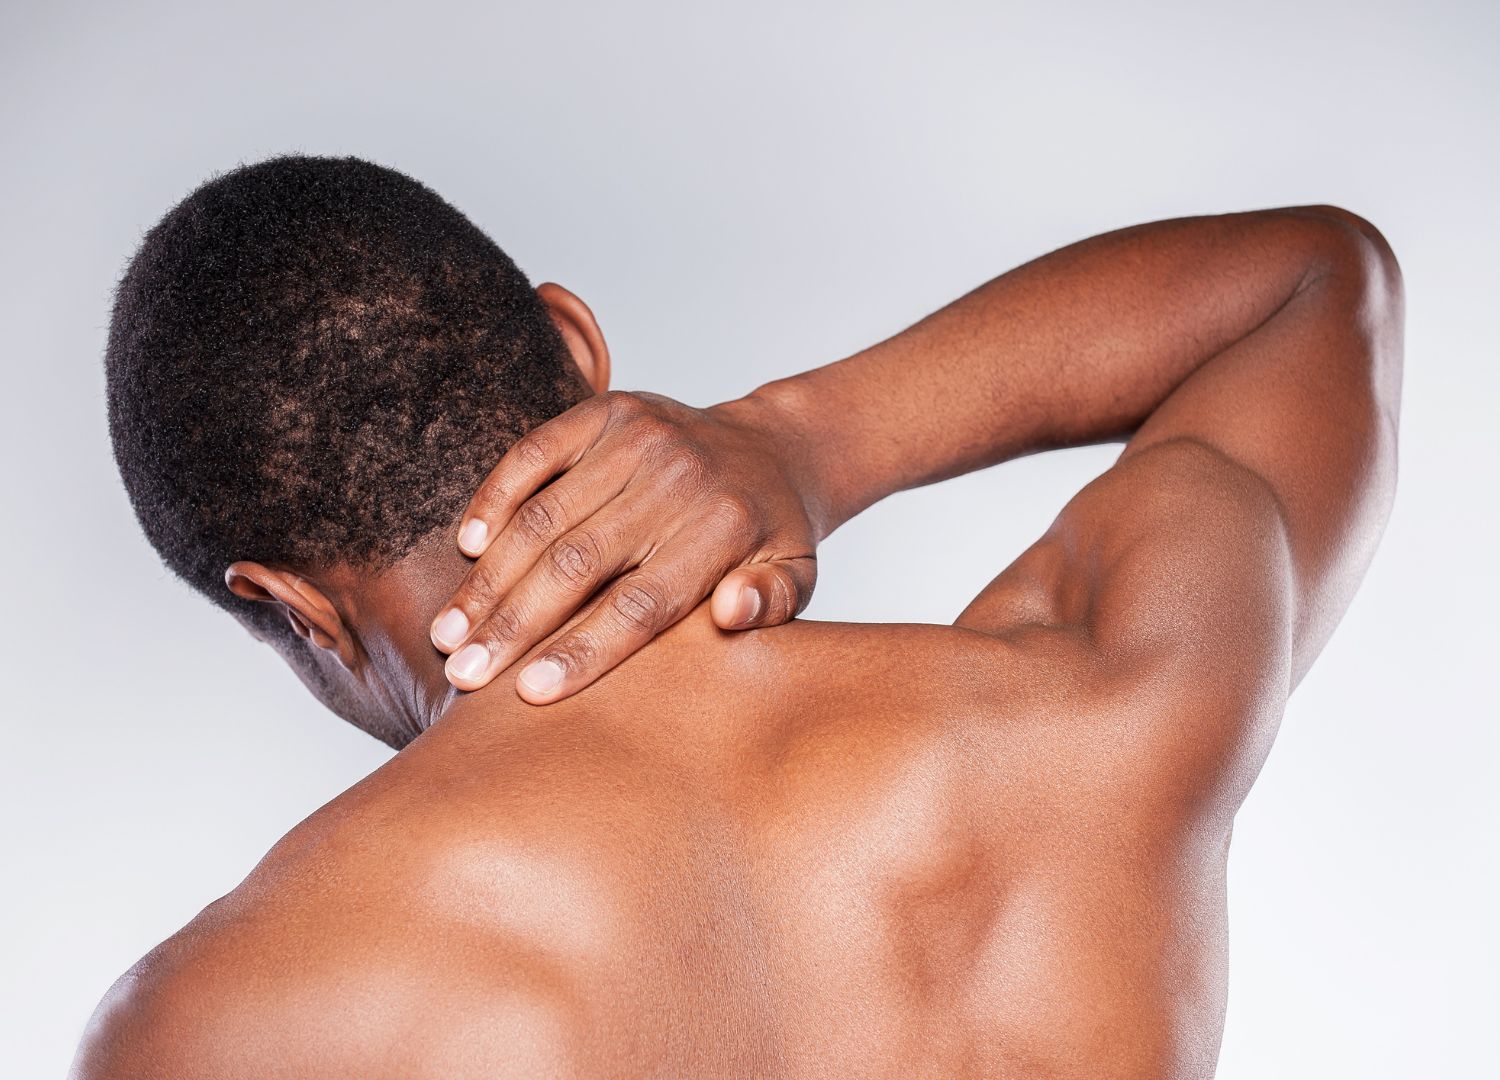 "Neck pain: When you should be  concerned"